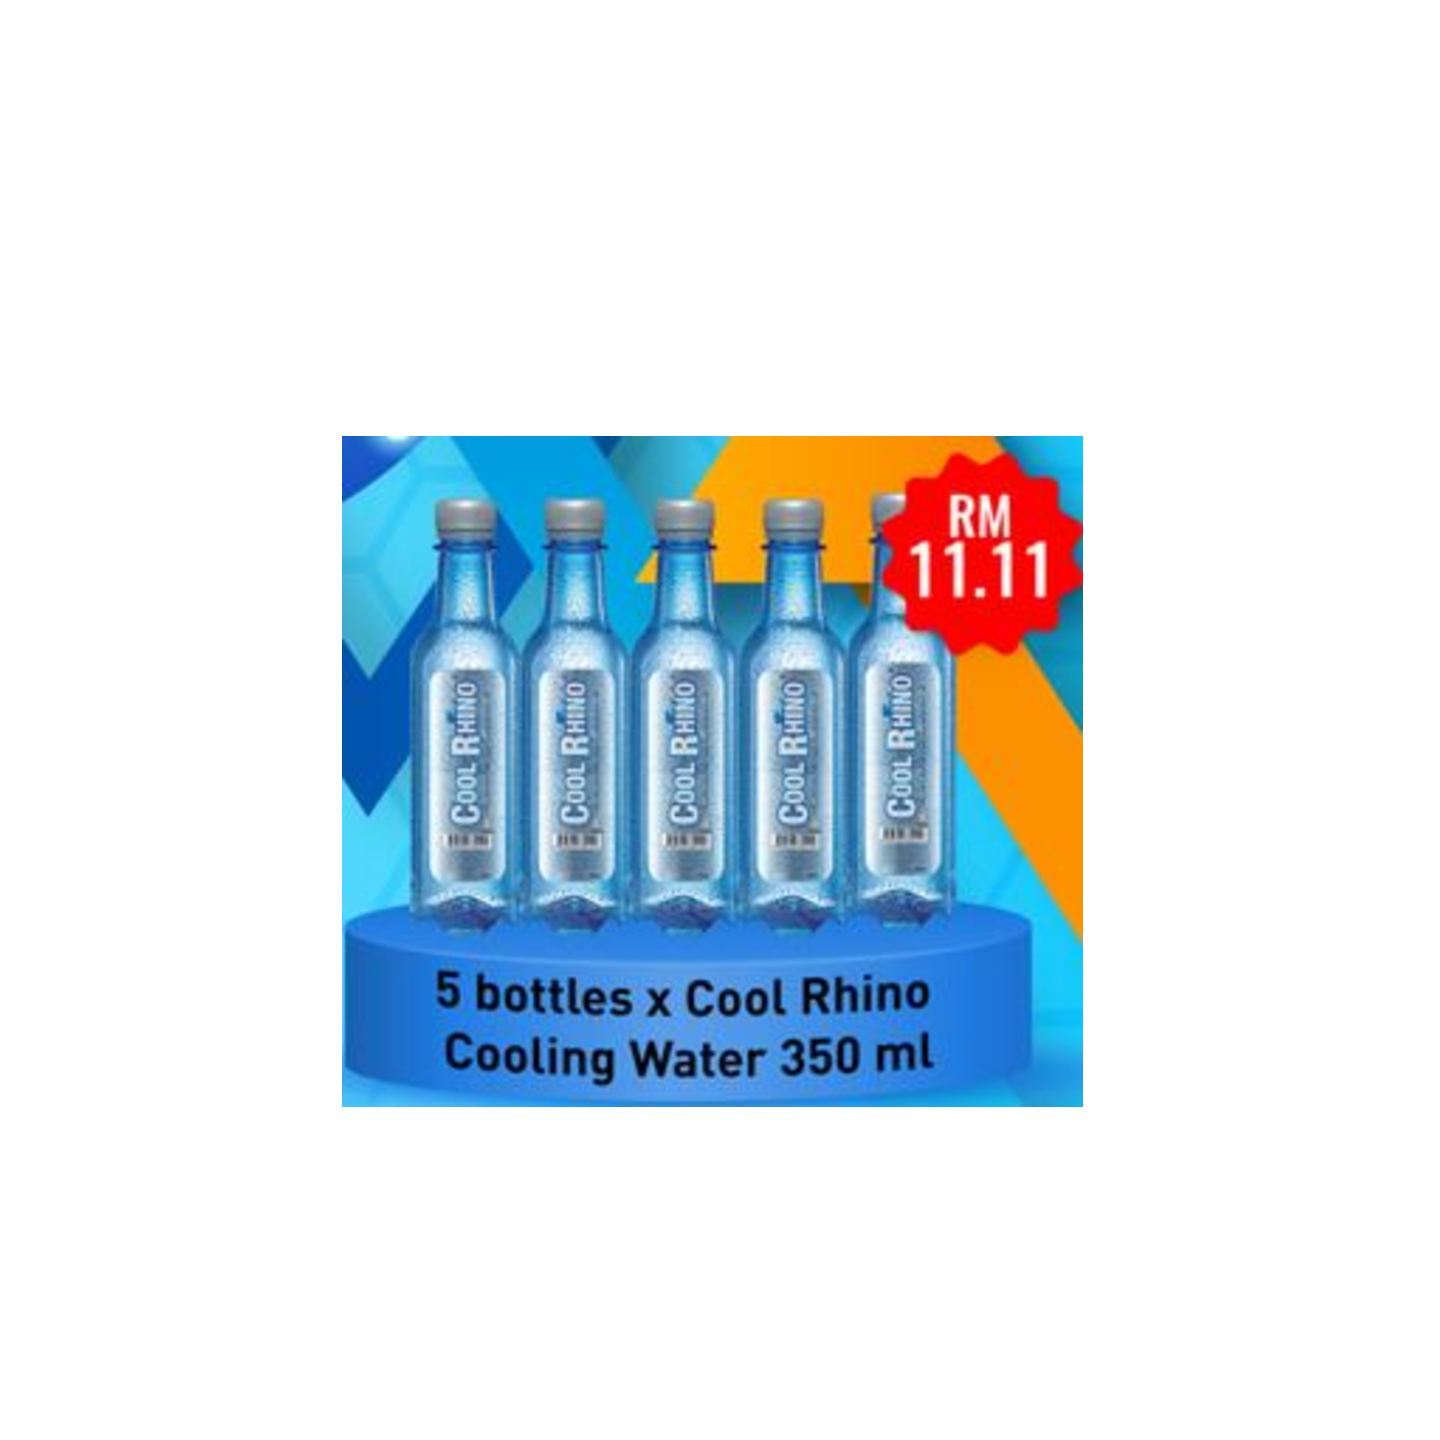 PACKAGE 1 : COOL RHINO COOLING WATER 350ML x 5